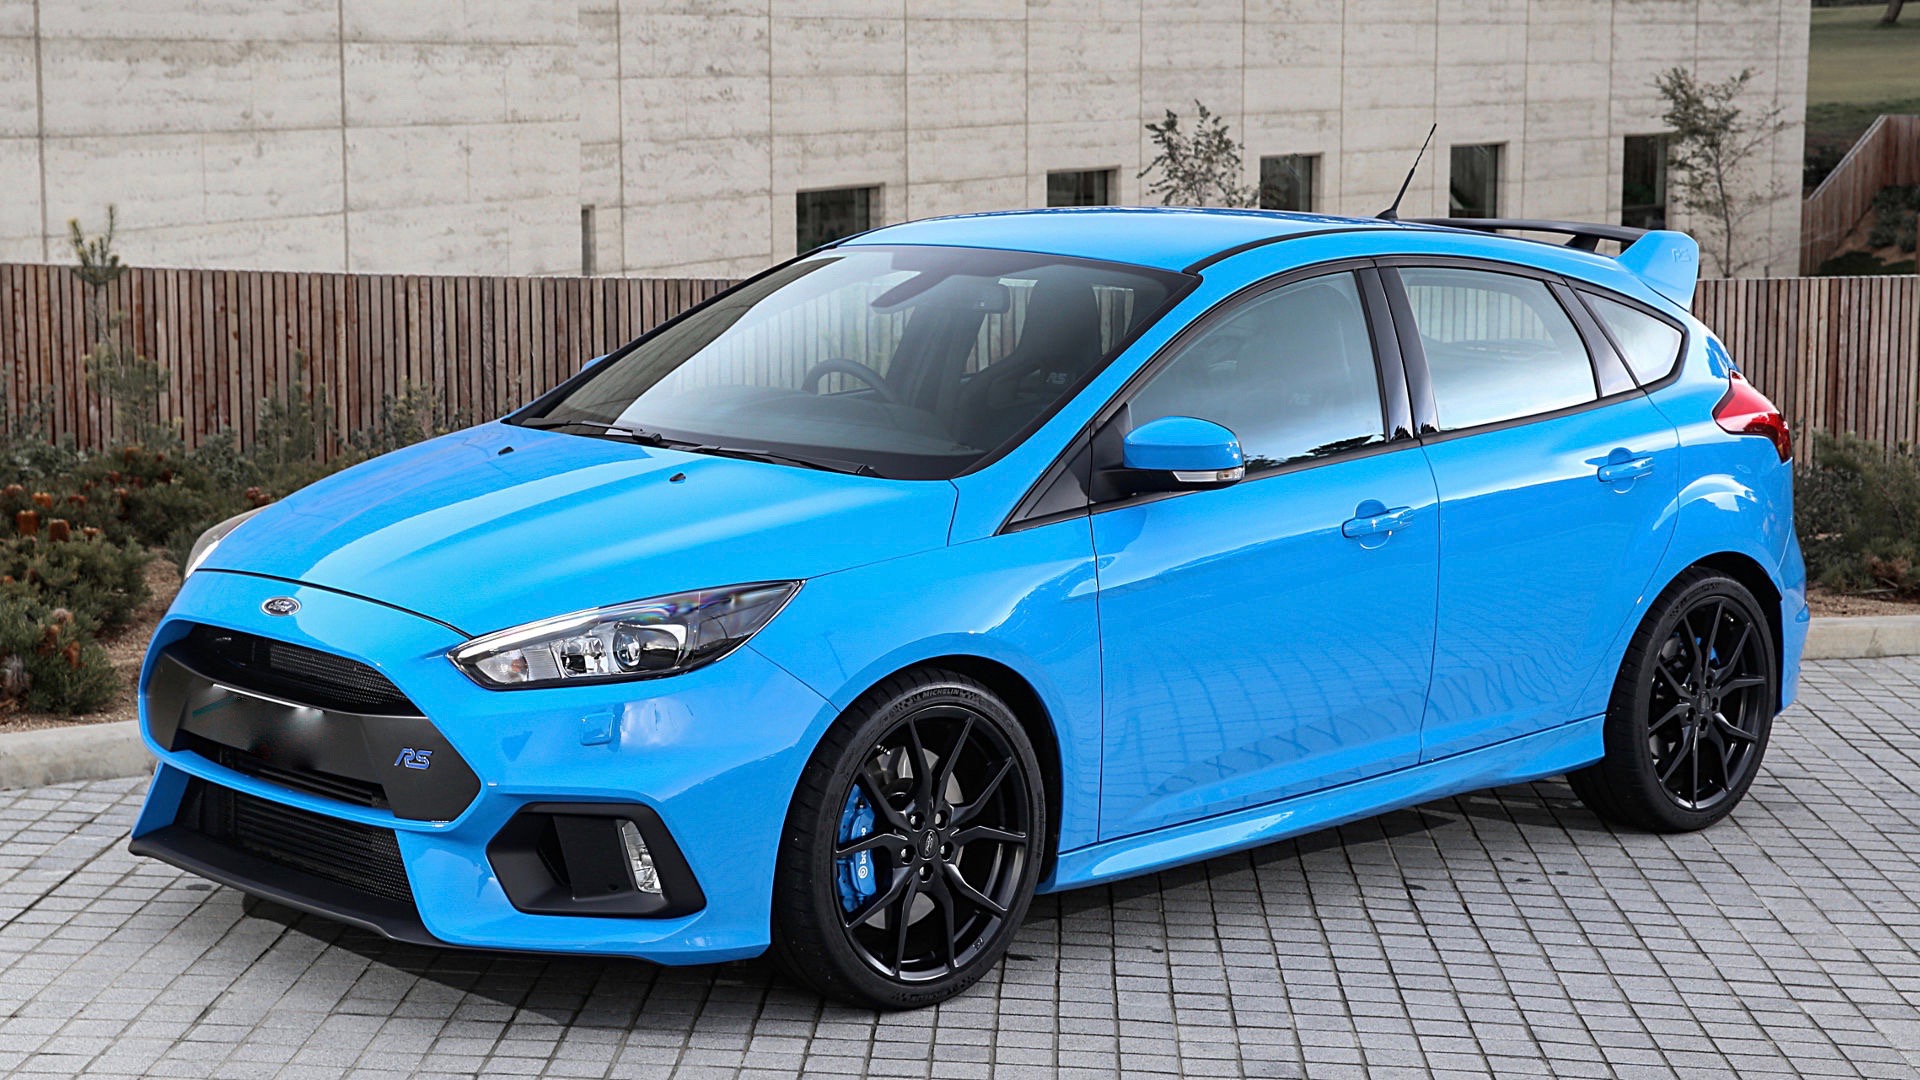 Ford Focus RS 2017 | Ford Motor Company
